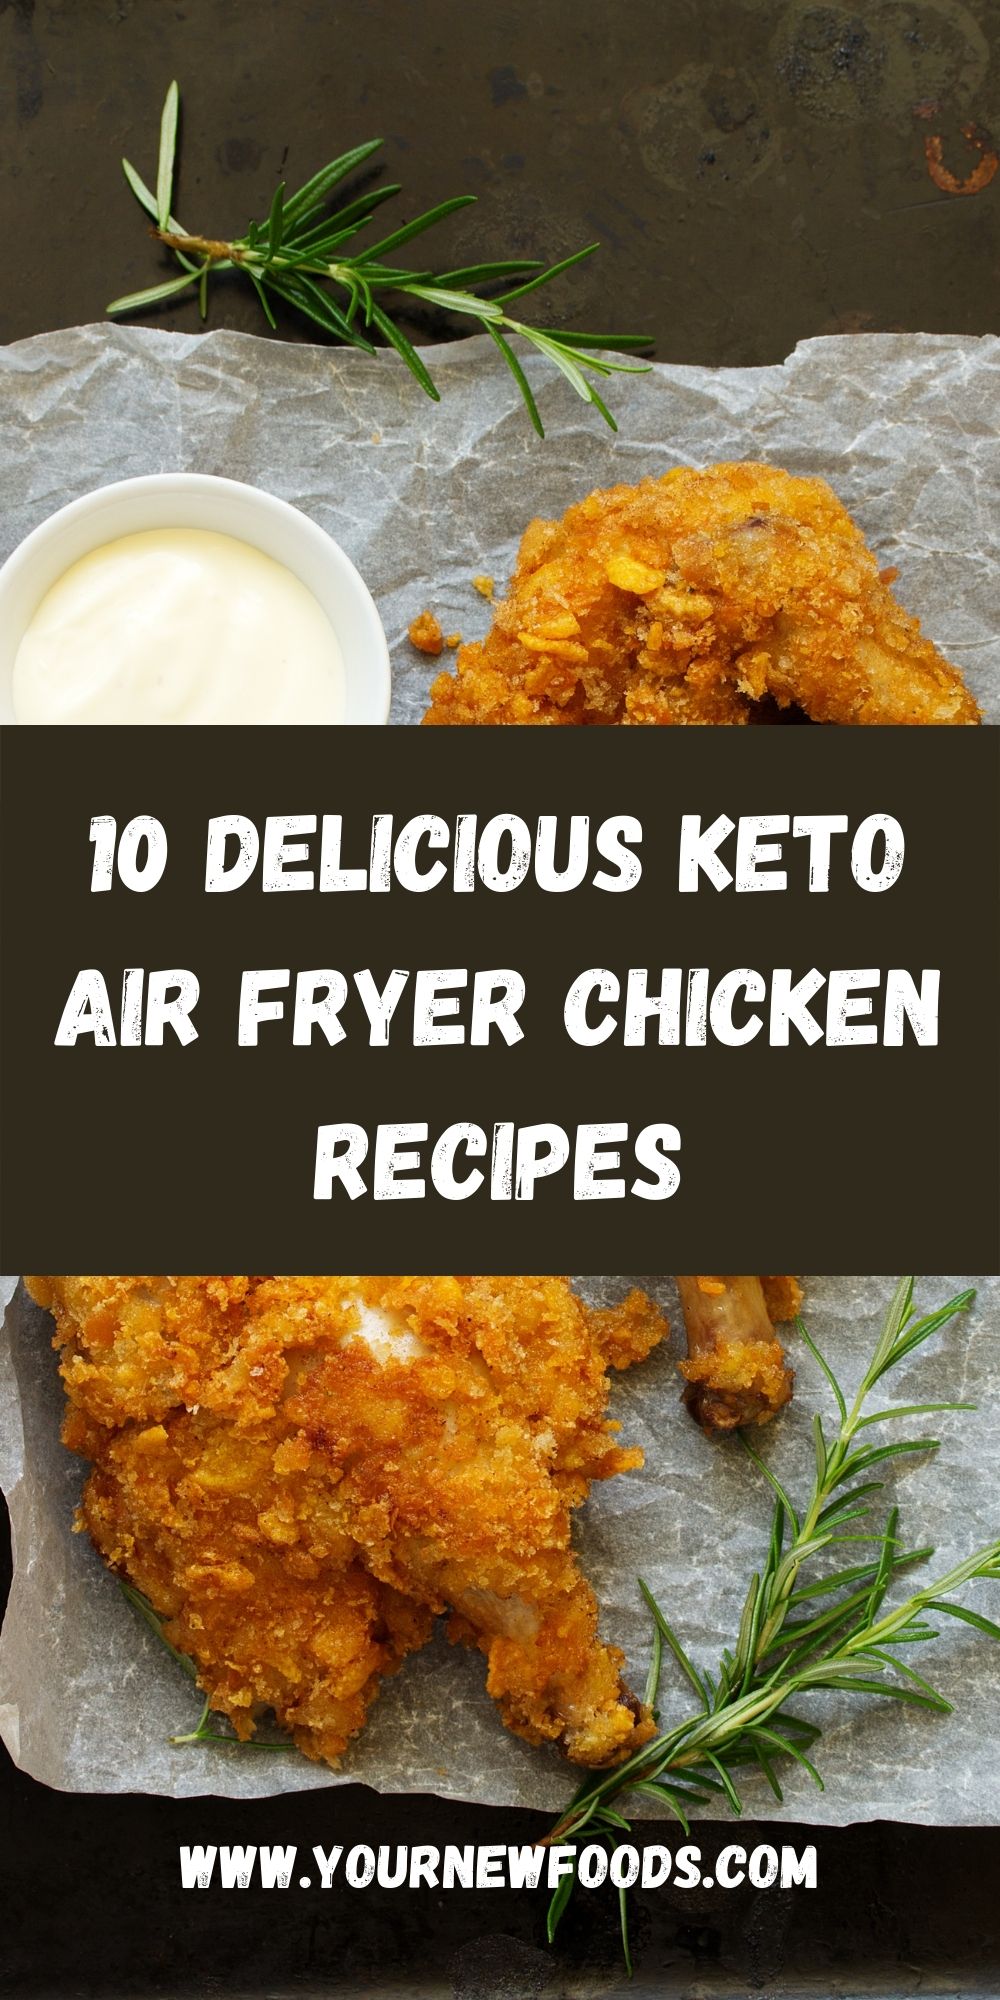 10 Delicious Keto Air Fryer Chicken Recipes with a picture of fried chicken on a black slate